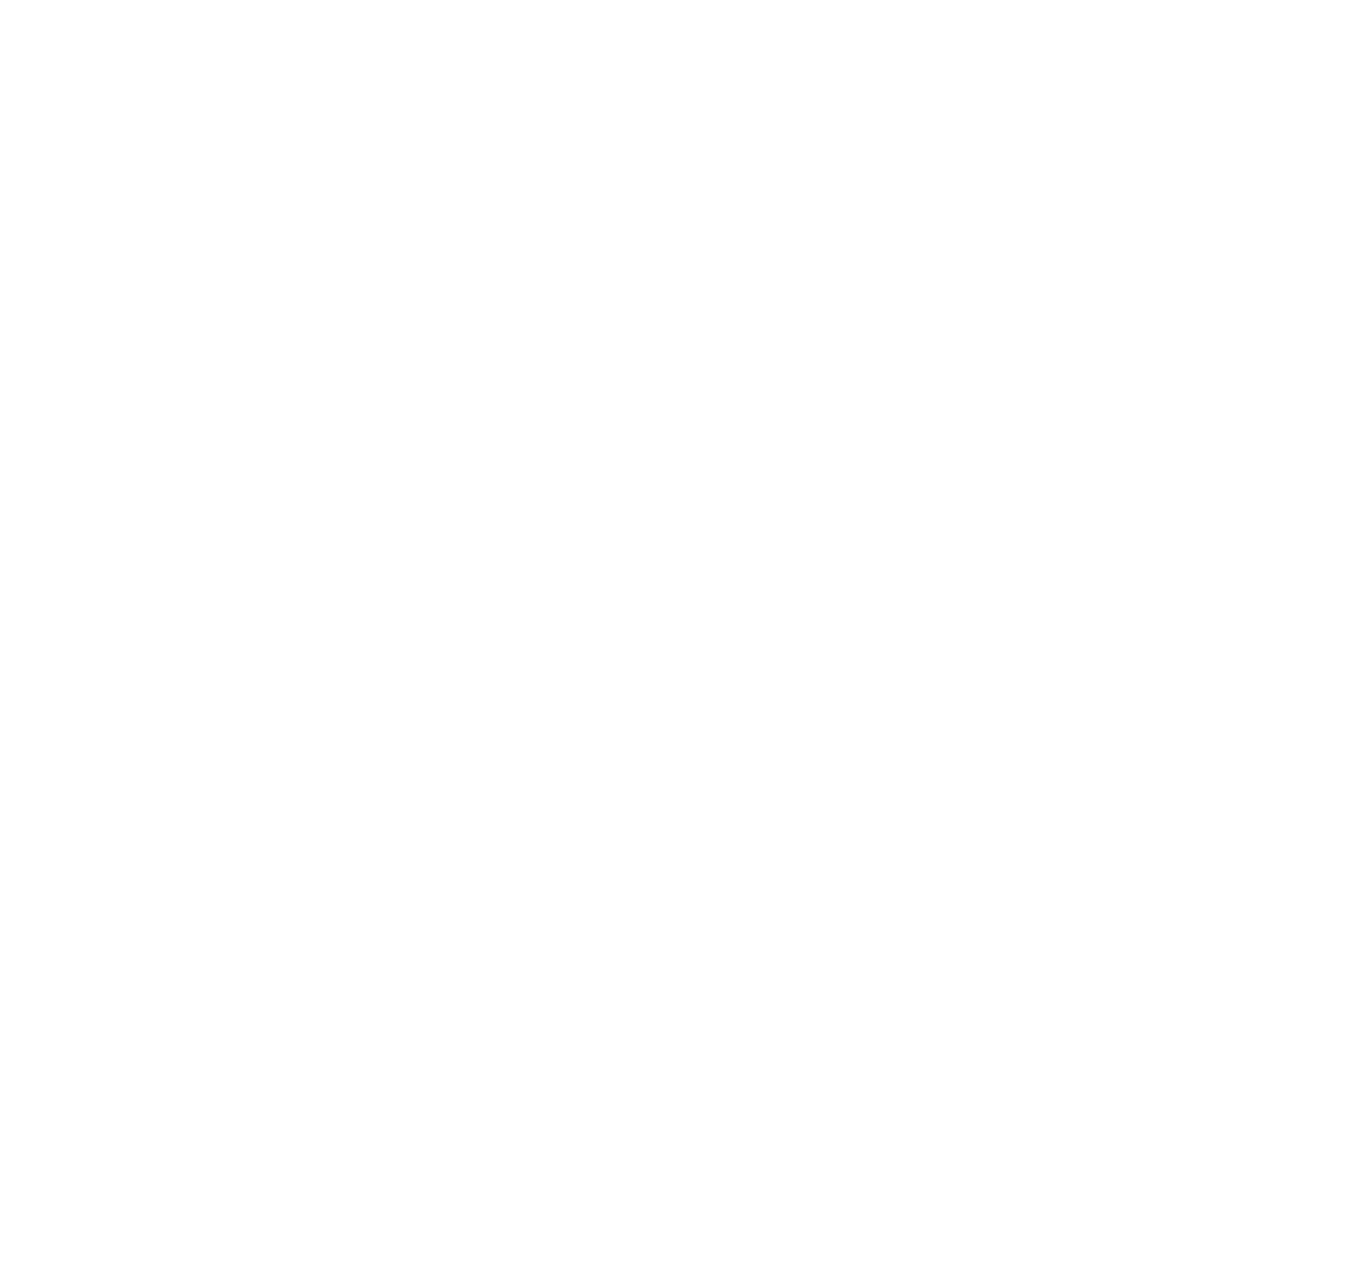 Make a Warranty Registration or Claim for a Pure Fishing product